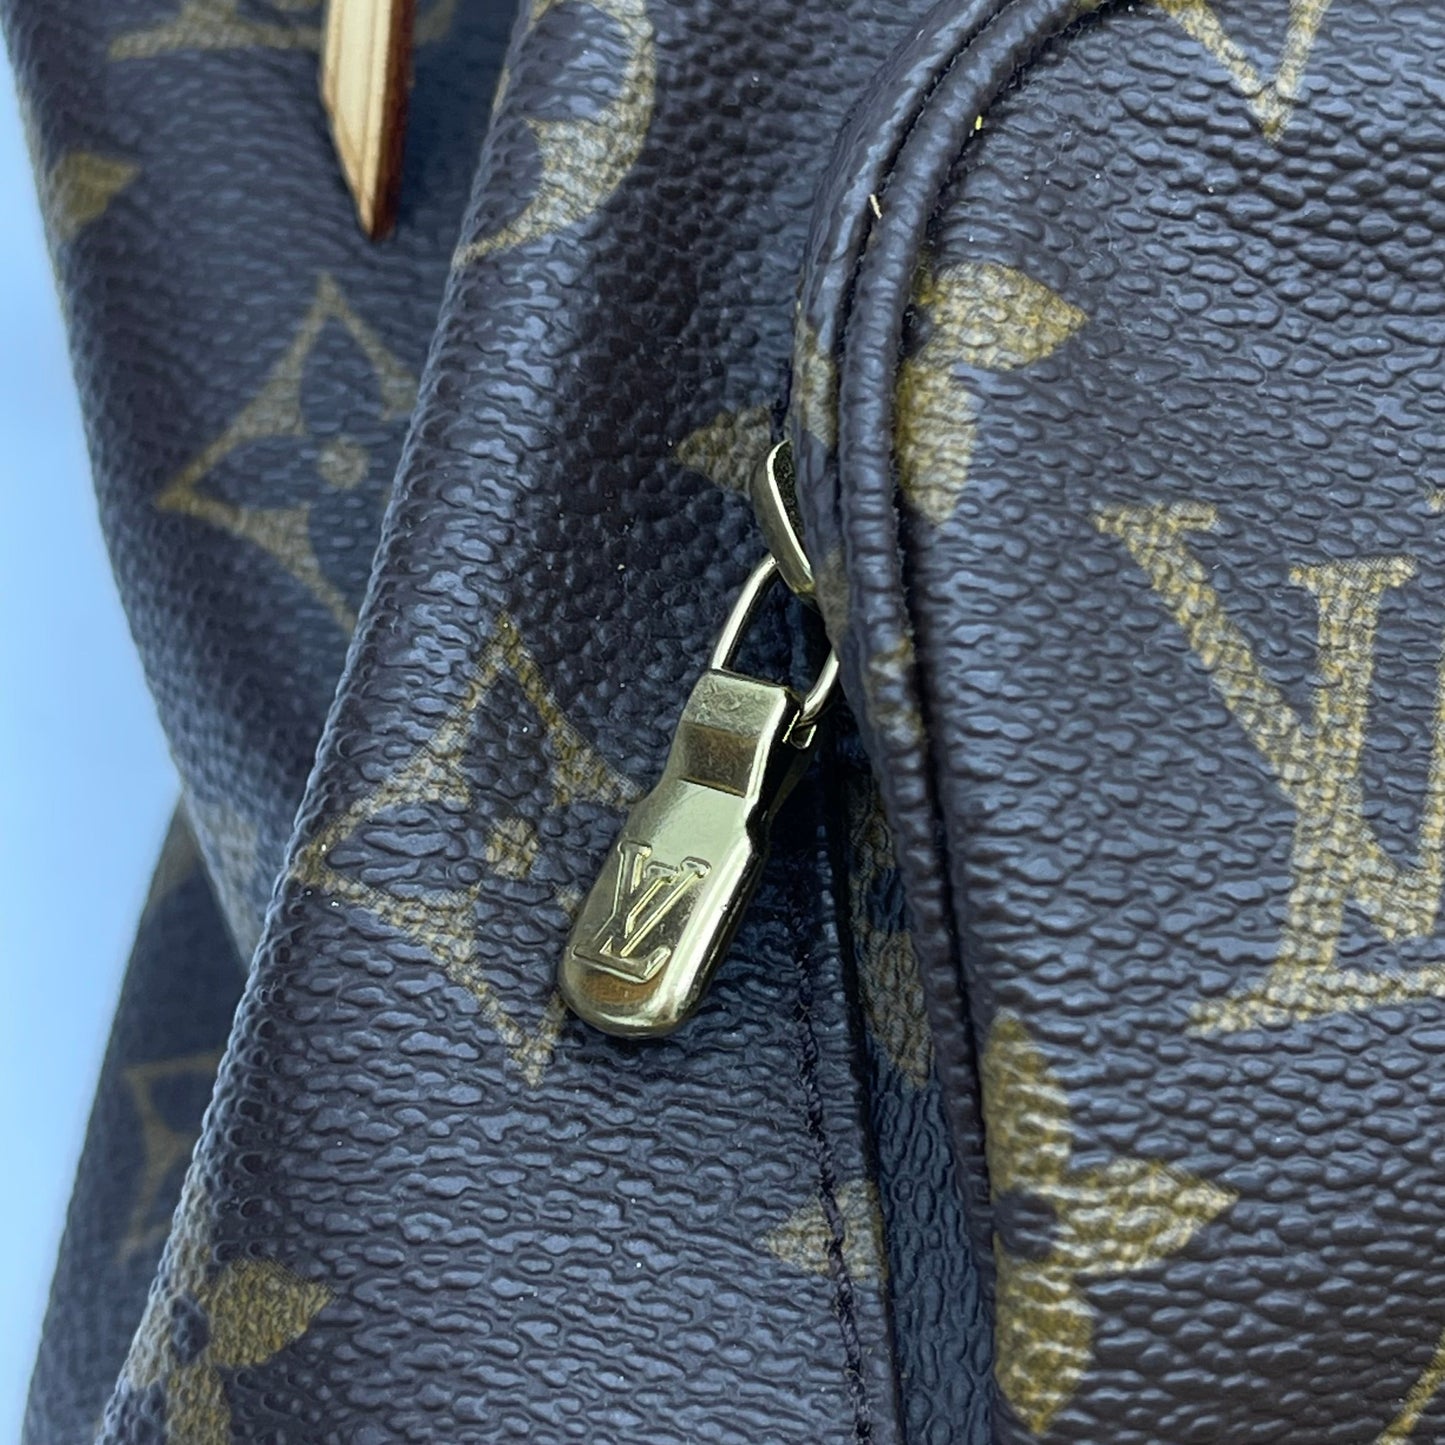 Backpack Luxury Designer Louis Vuitton, Size Small